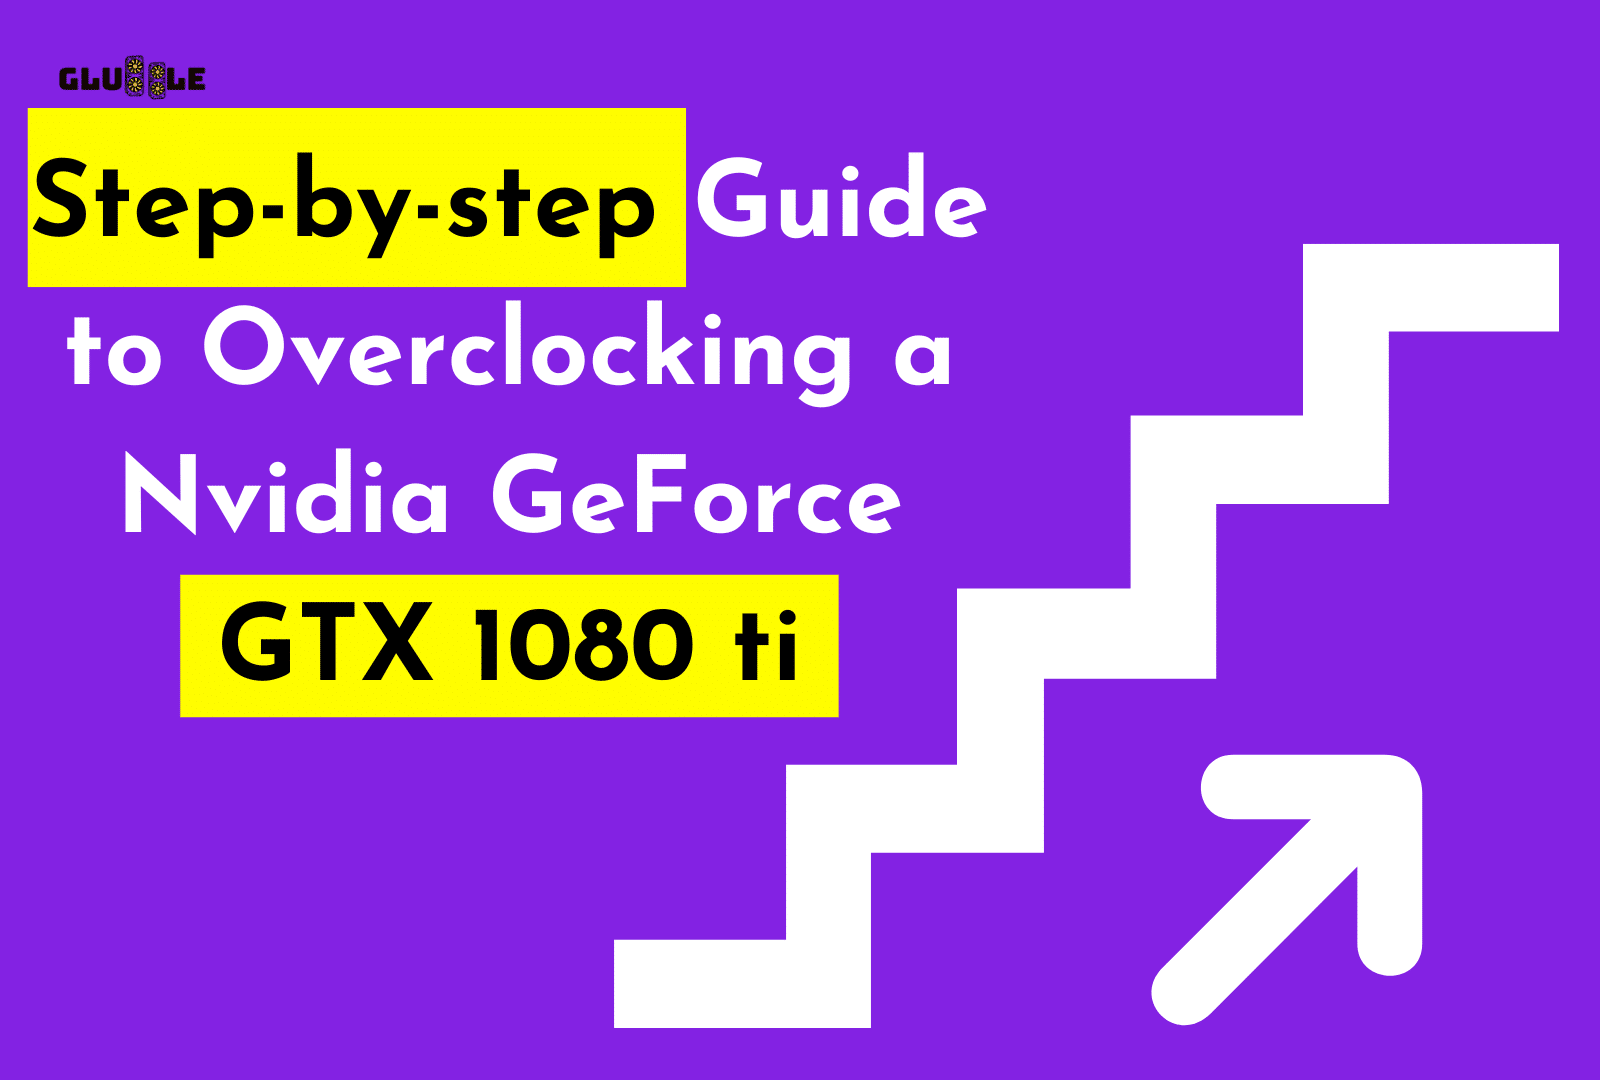 C:\Users\Mohsin\Downloads\Step-by-step Guide to Overclocking a Nvidia GeForce GTX 1080 ti.png